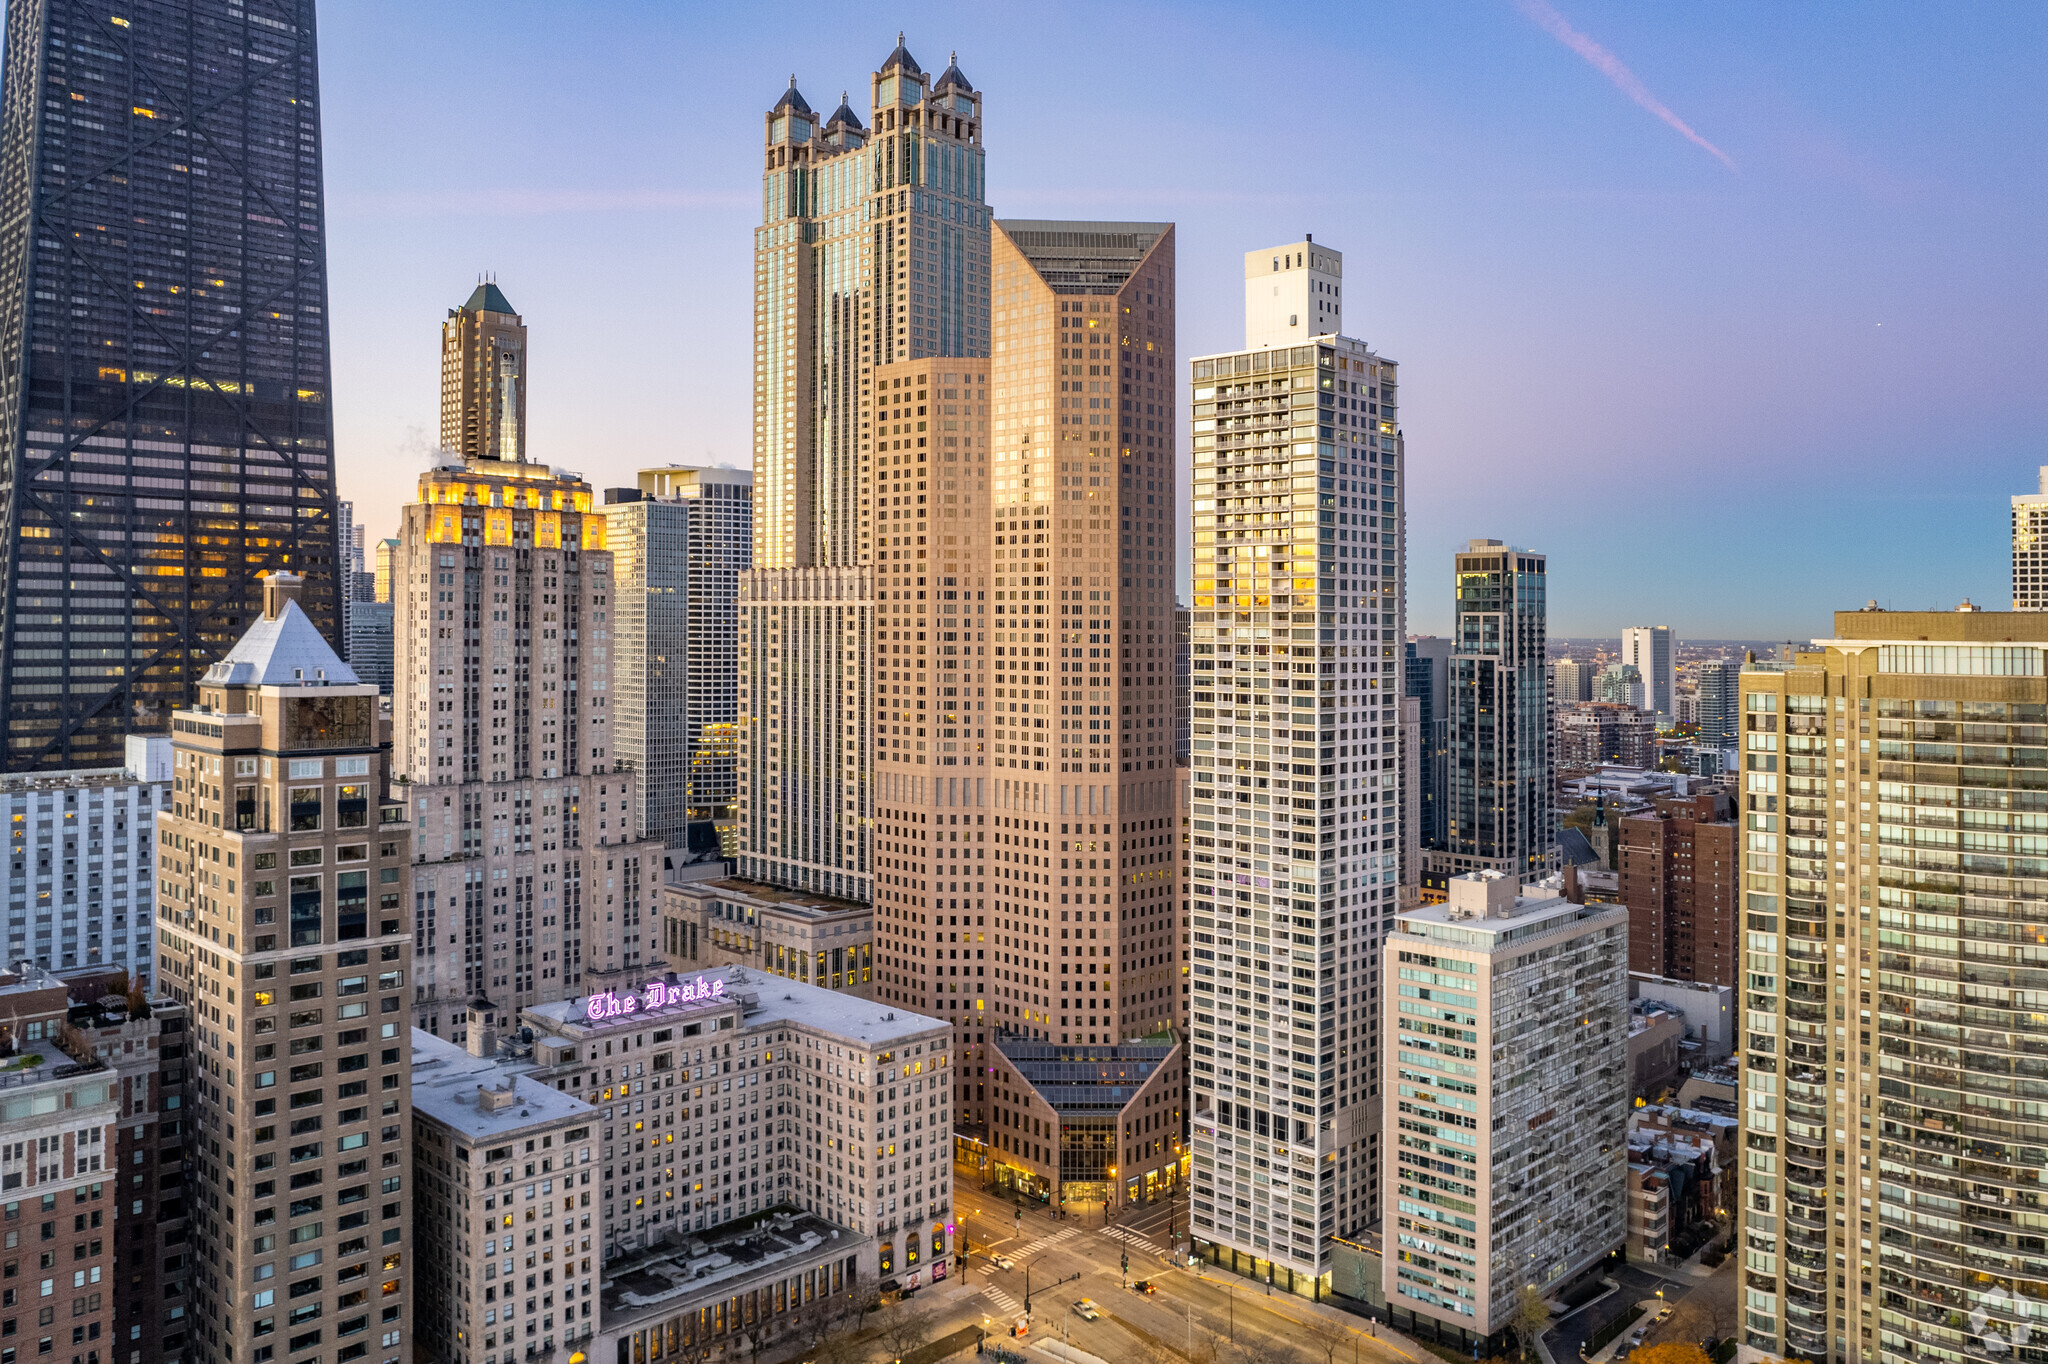 980 N. MICHIGAN AVE <br> ONE MAGNIFICENT MILE